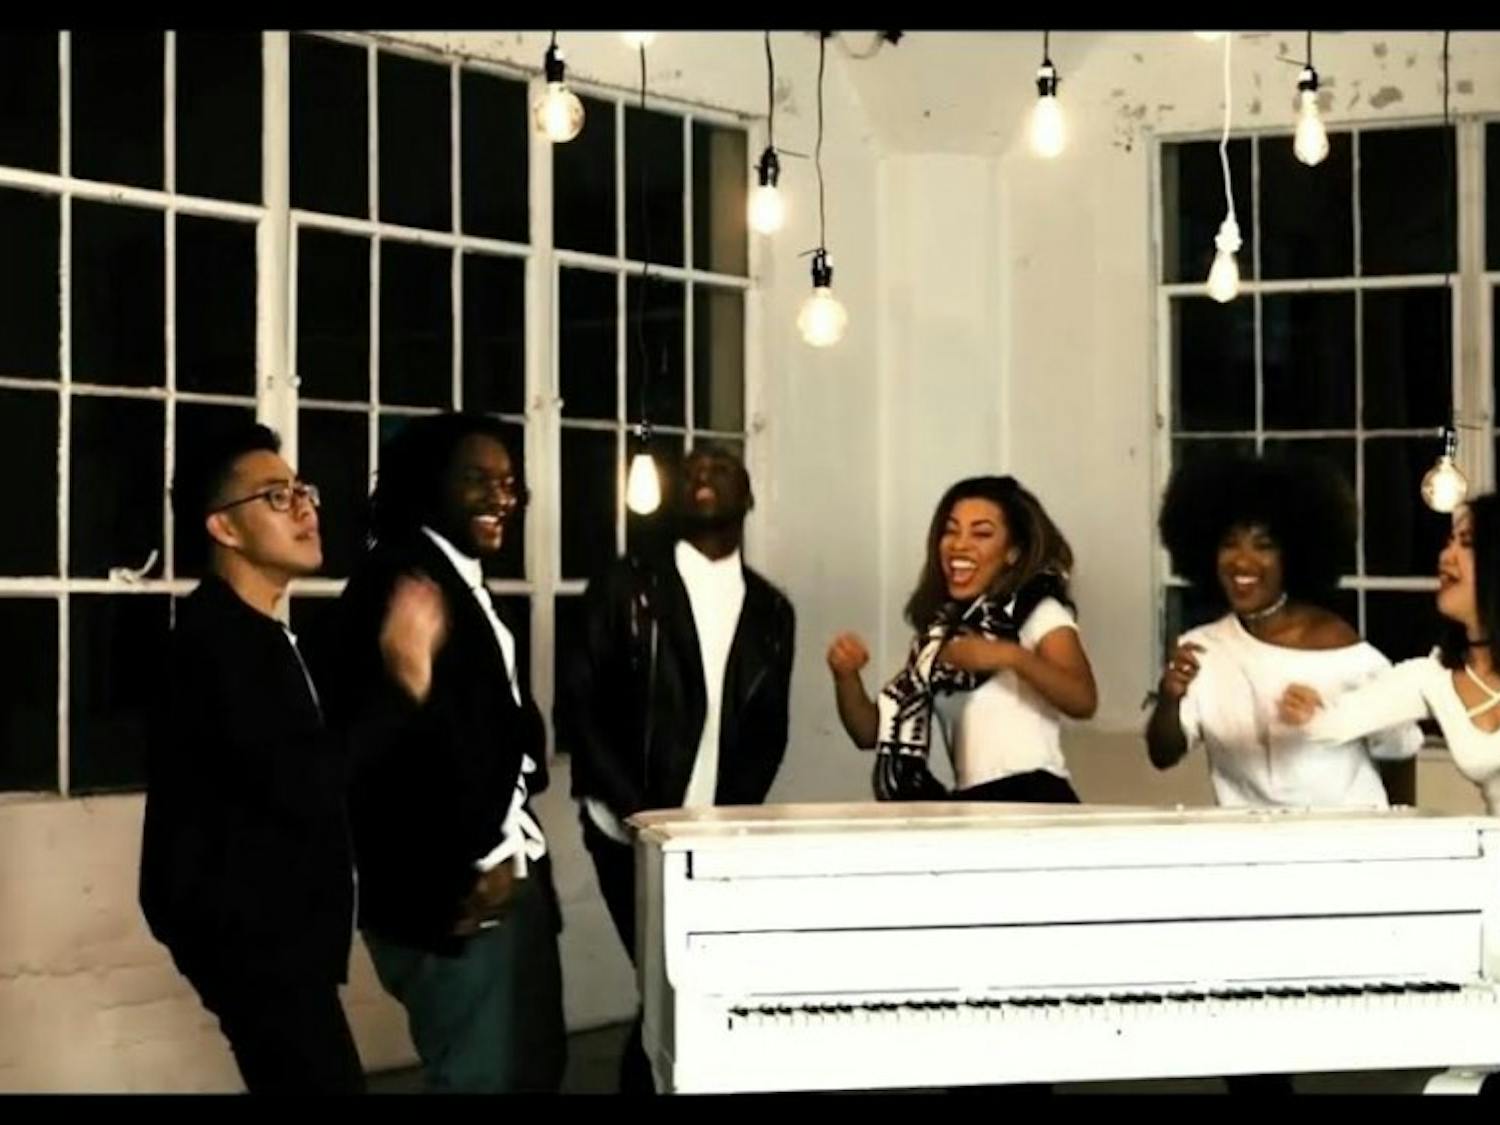 A composition of six different singers were used to perform the “#HAM4BEY” mashup video posted on Nov. 21. (Provided via&nbsp;Michael Korte)